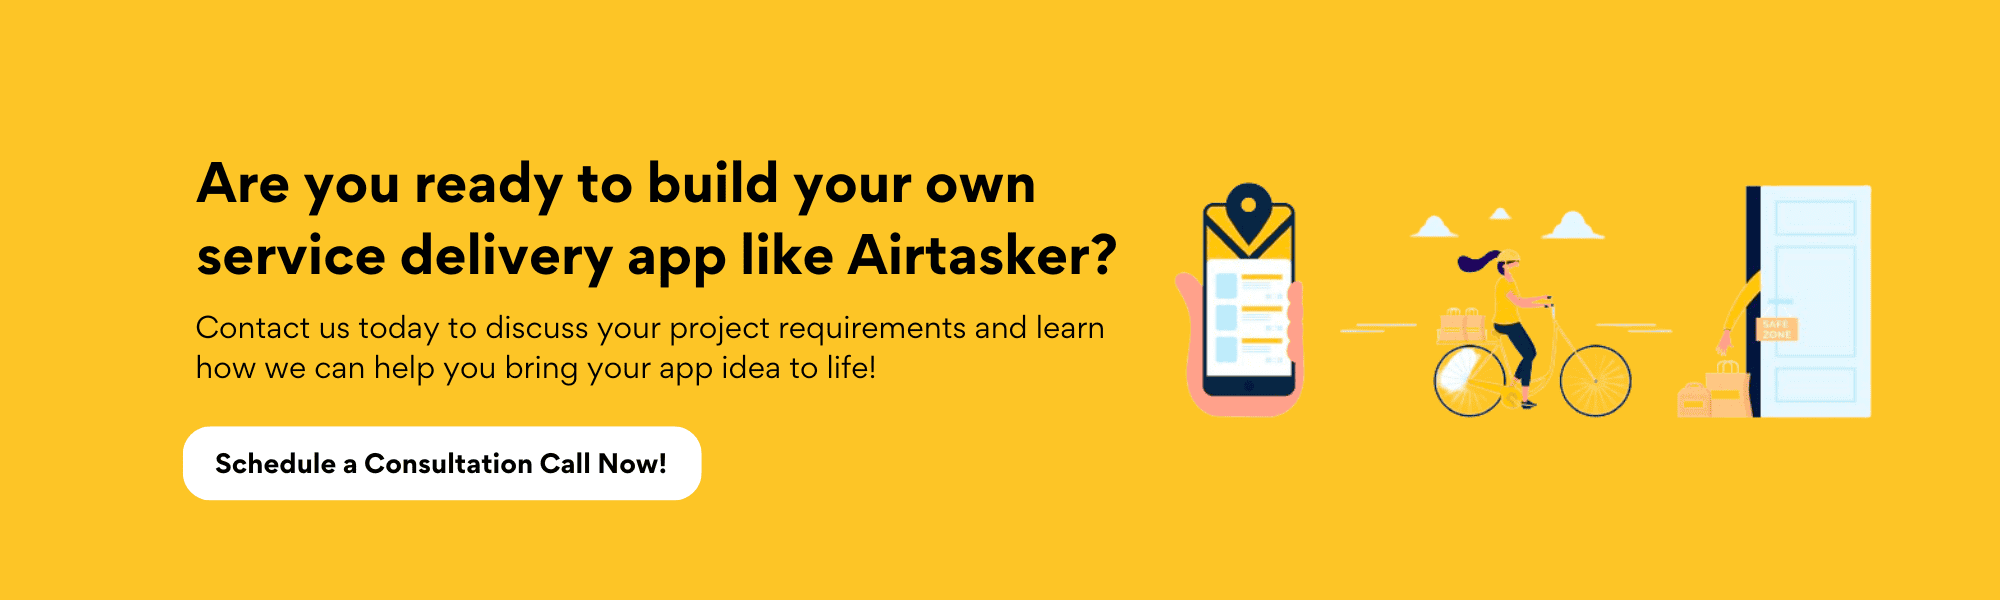 Are you ready to build your own service delivery app like Airtasker